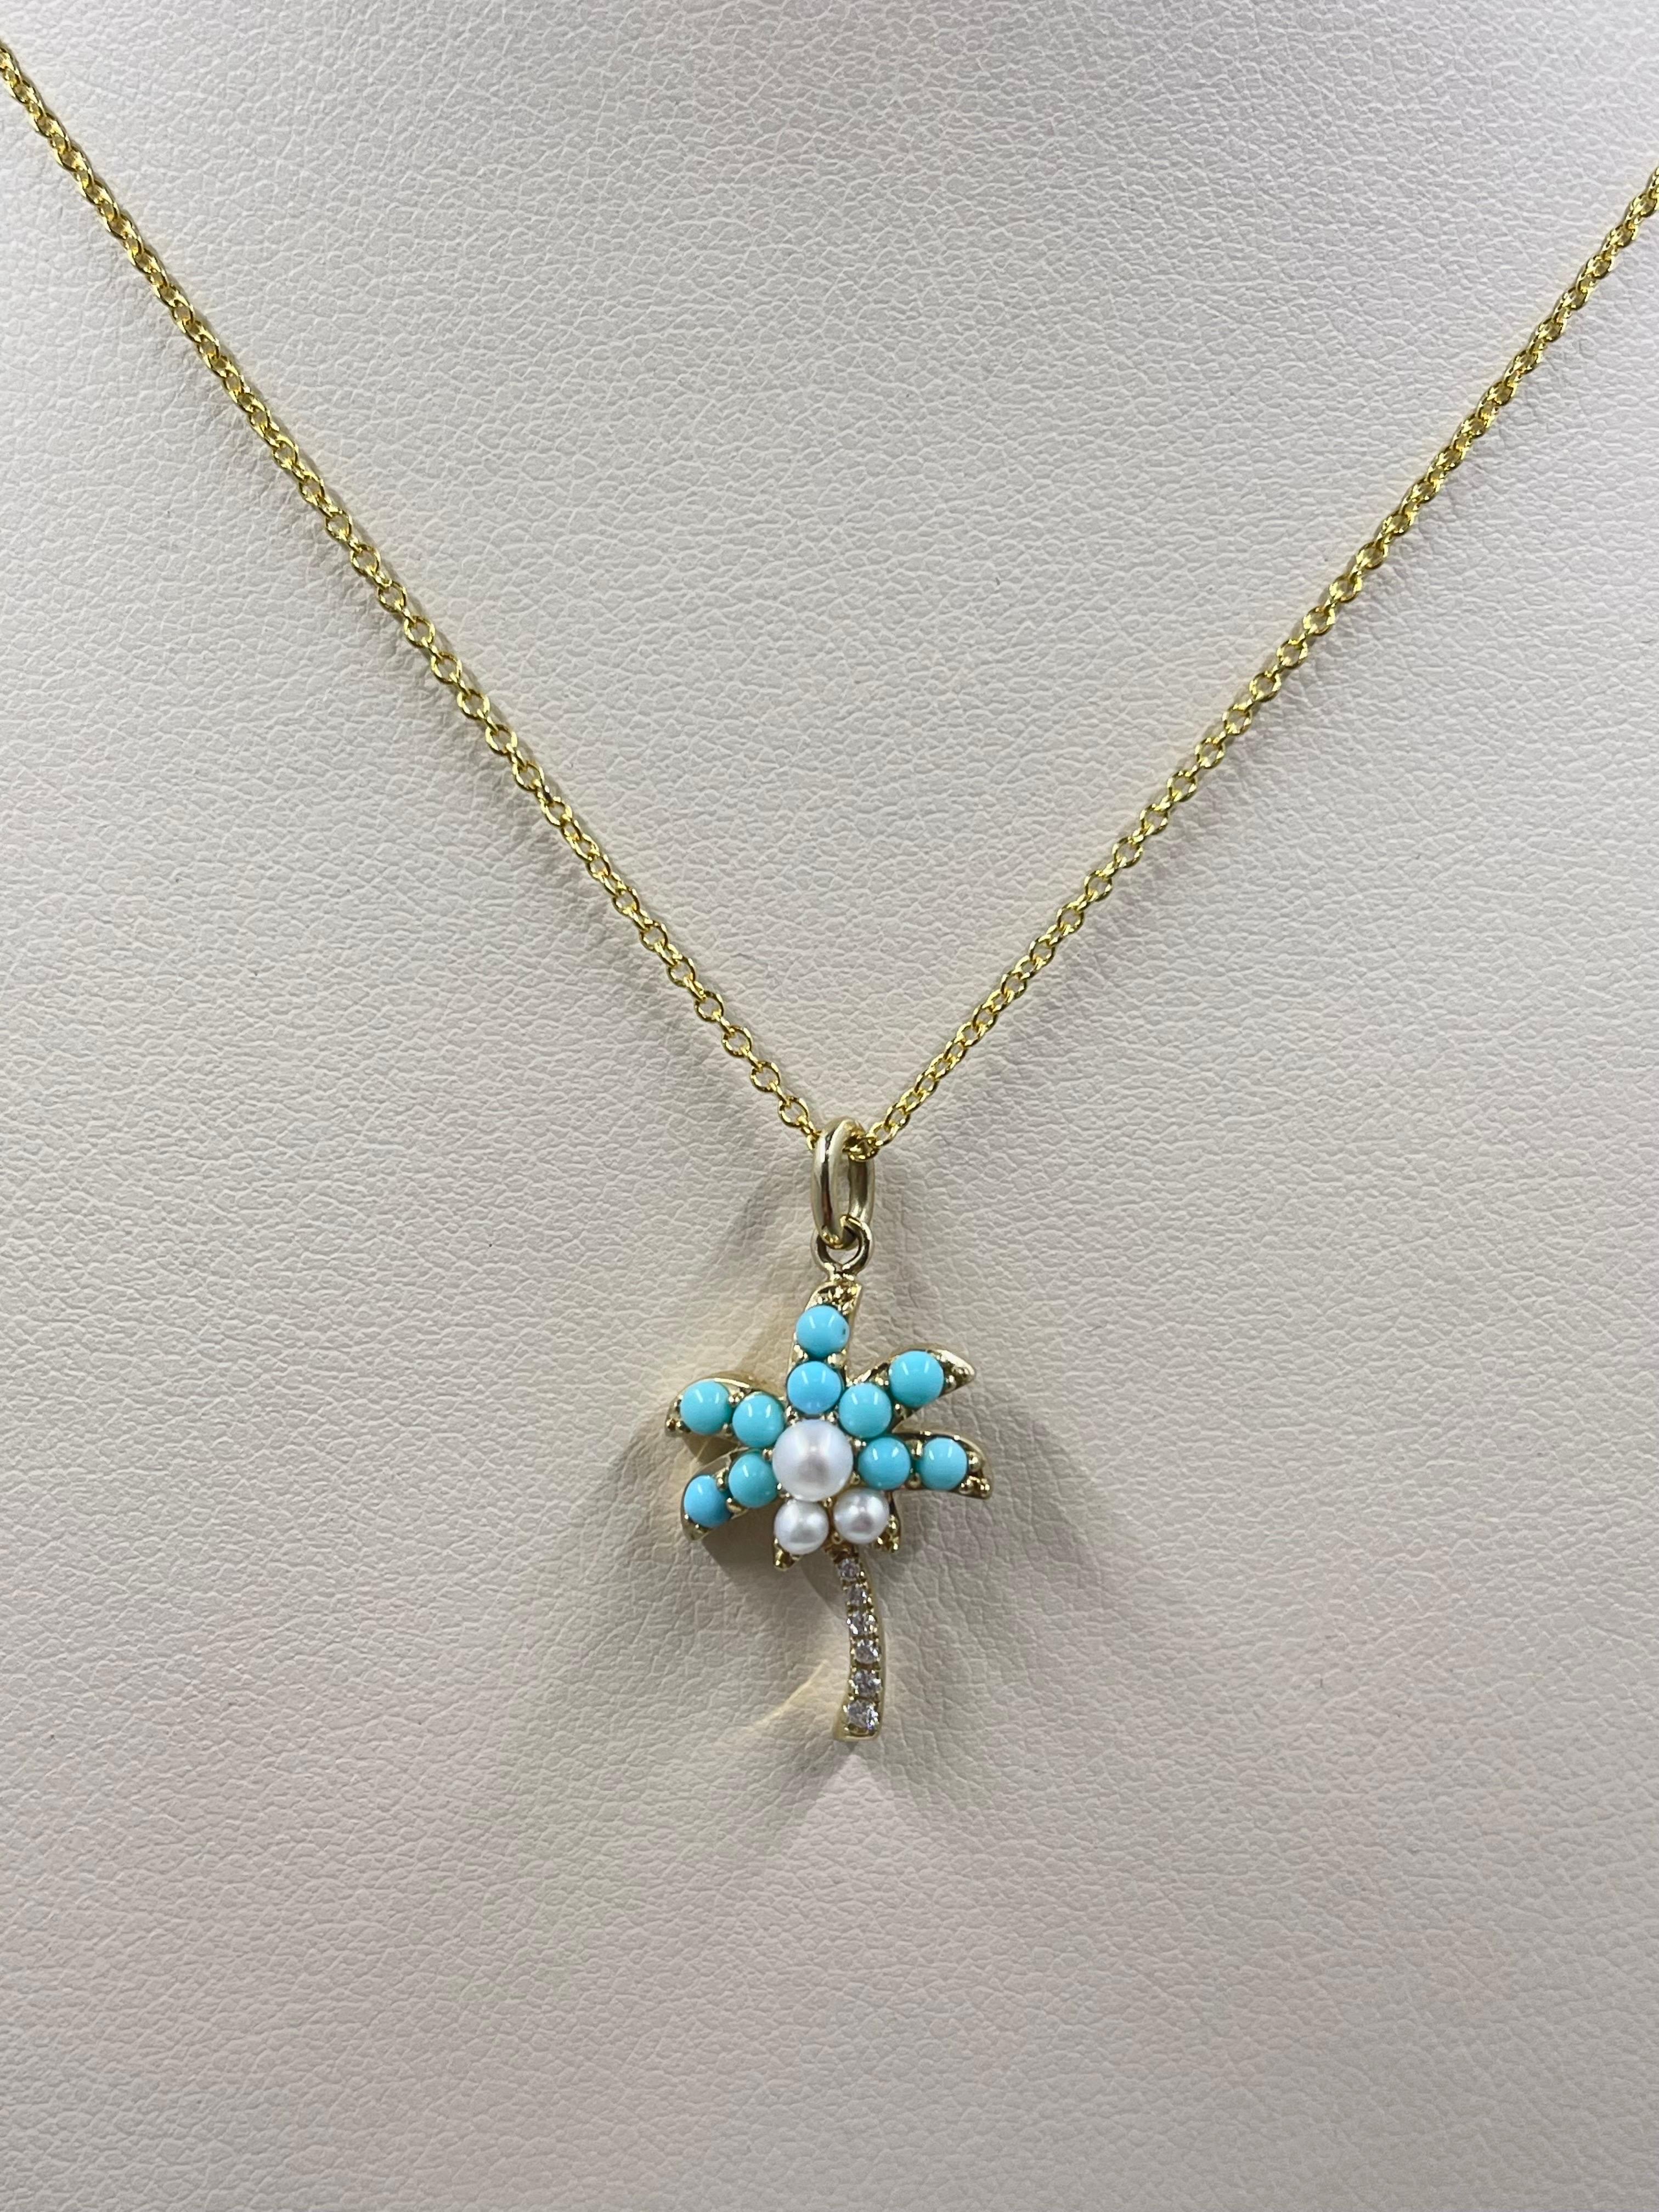 New Effy Turquoise, Pearl & Diamond Palm Tree Necklace In 14k.

Length is adjustable 16” or 18”